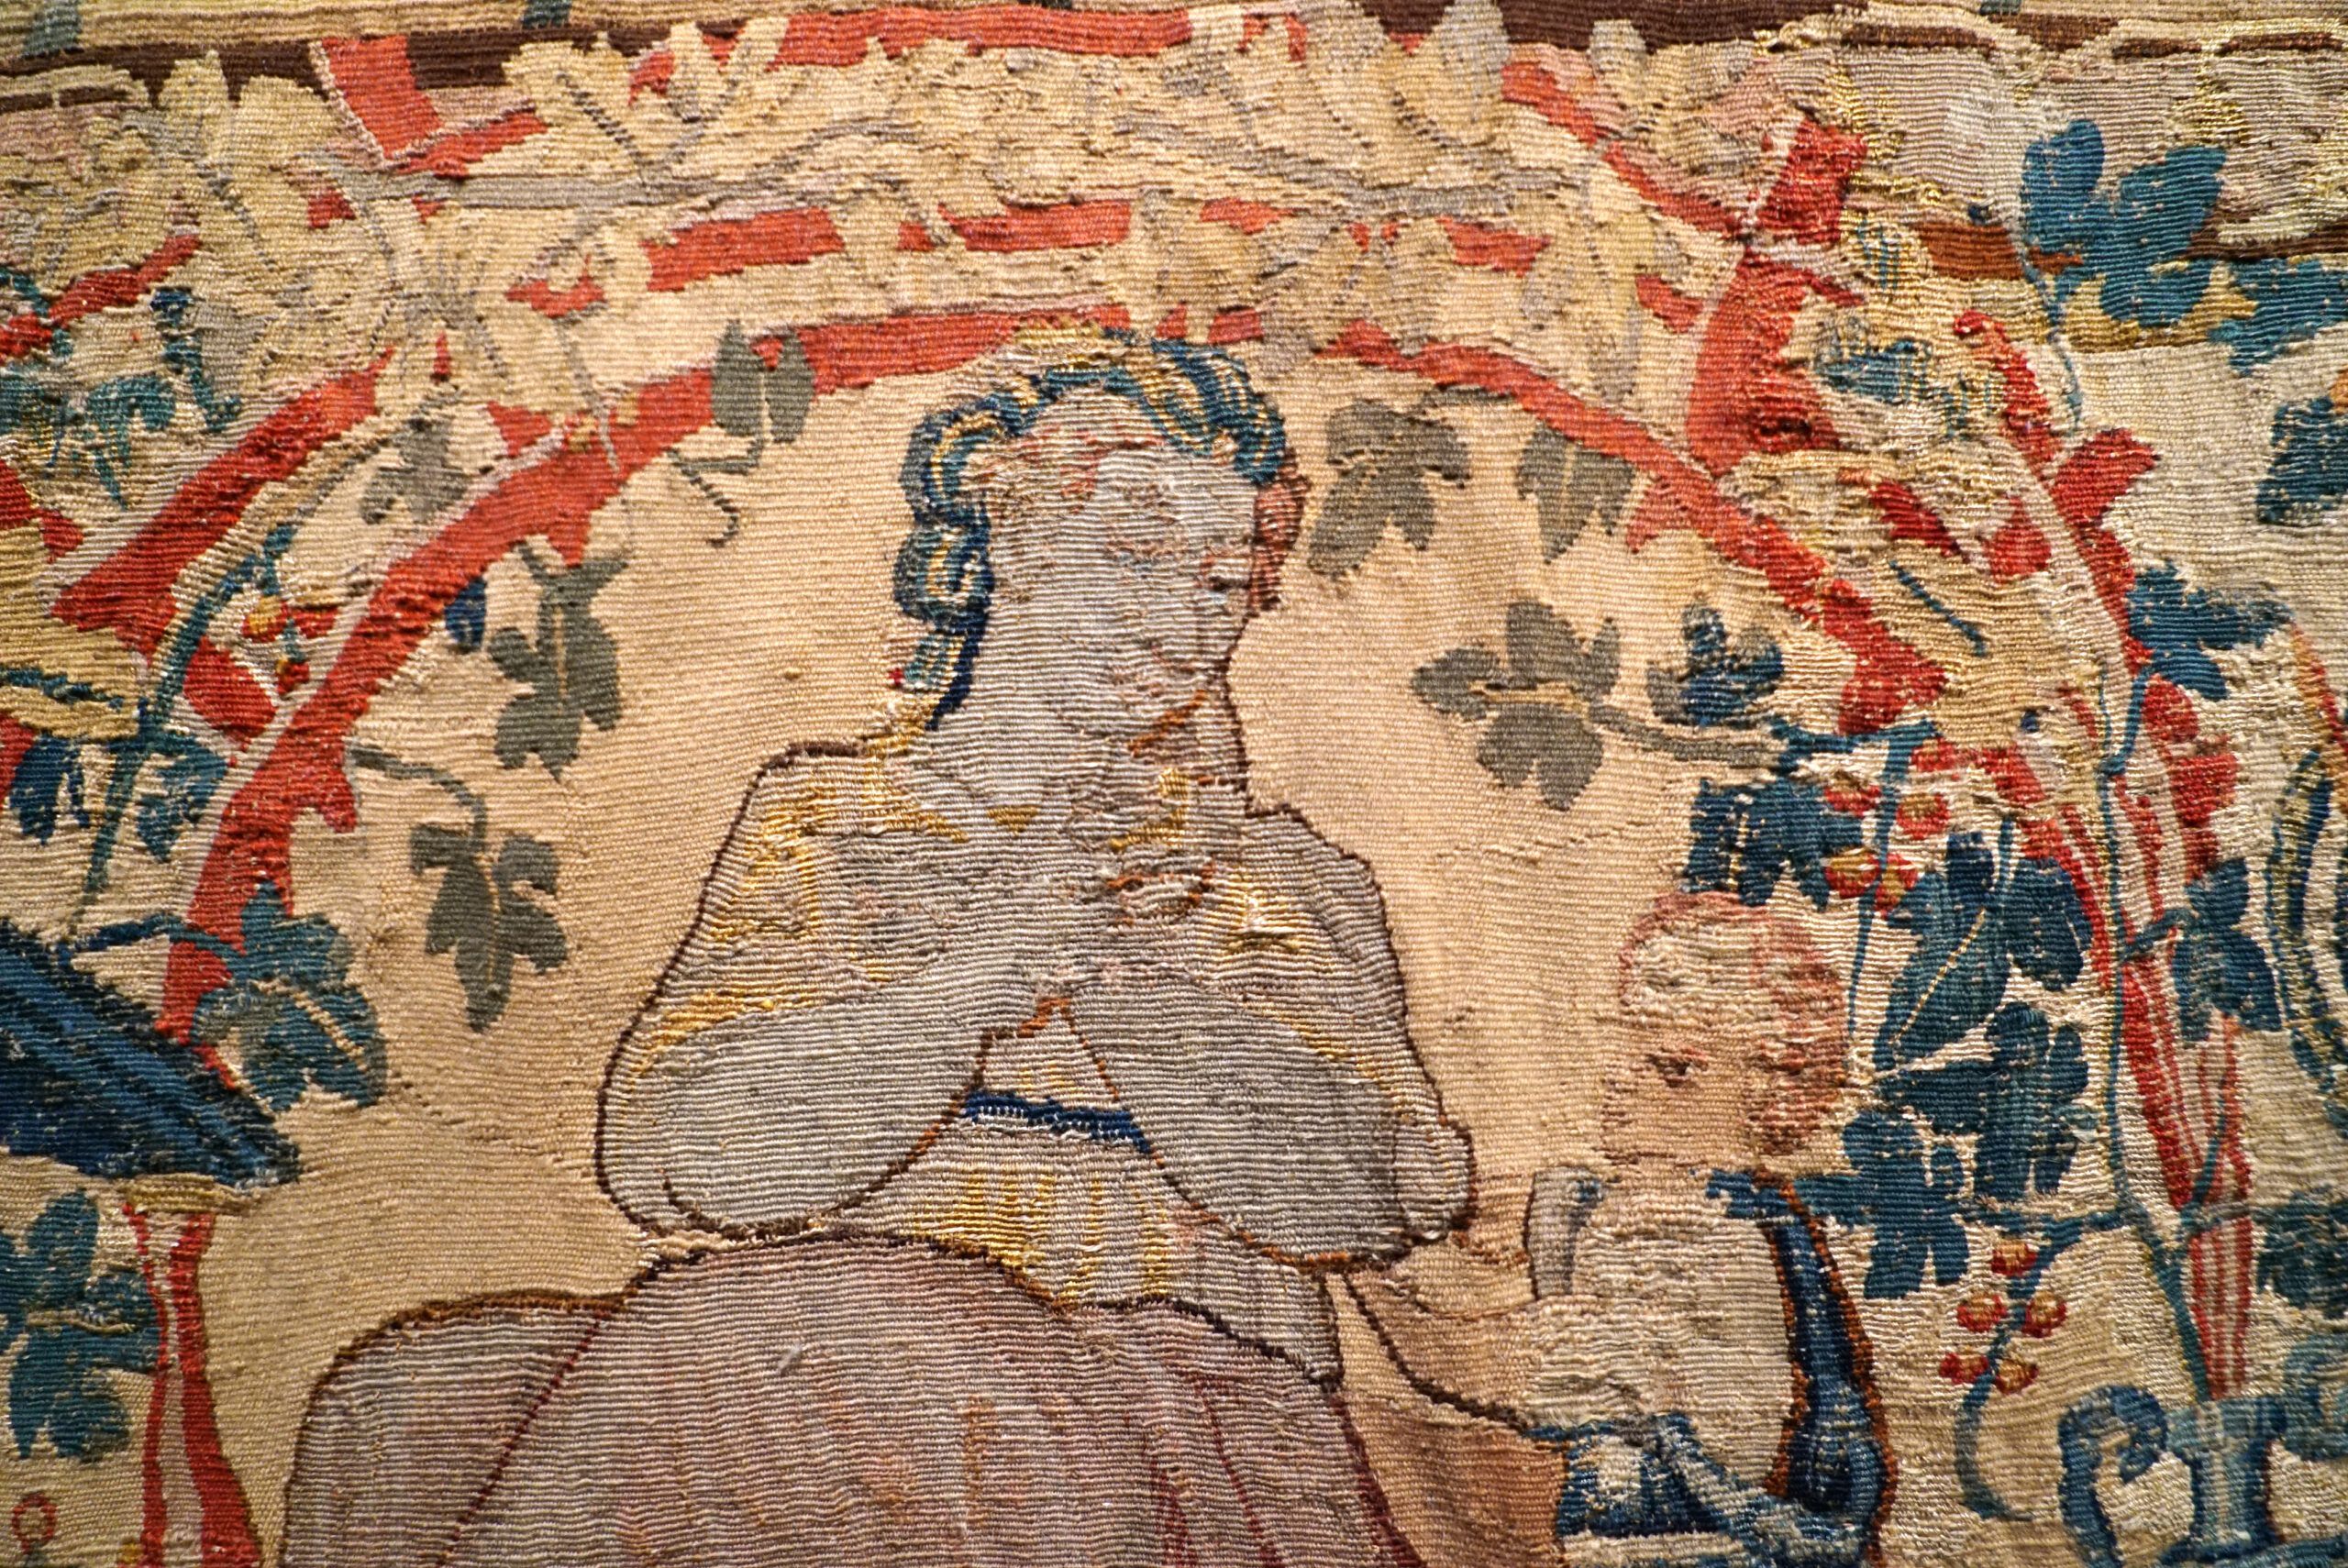 16th Century Flemish Tapestry from The Hodges Family Collection